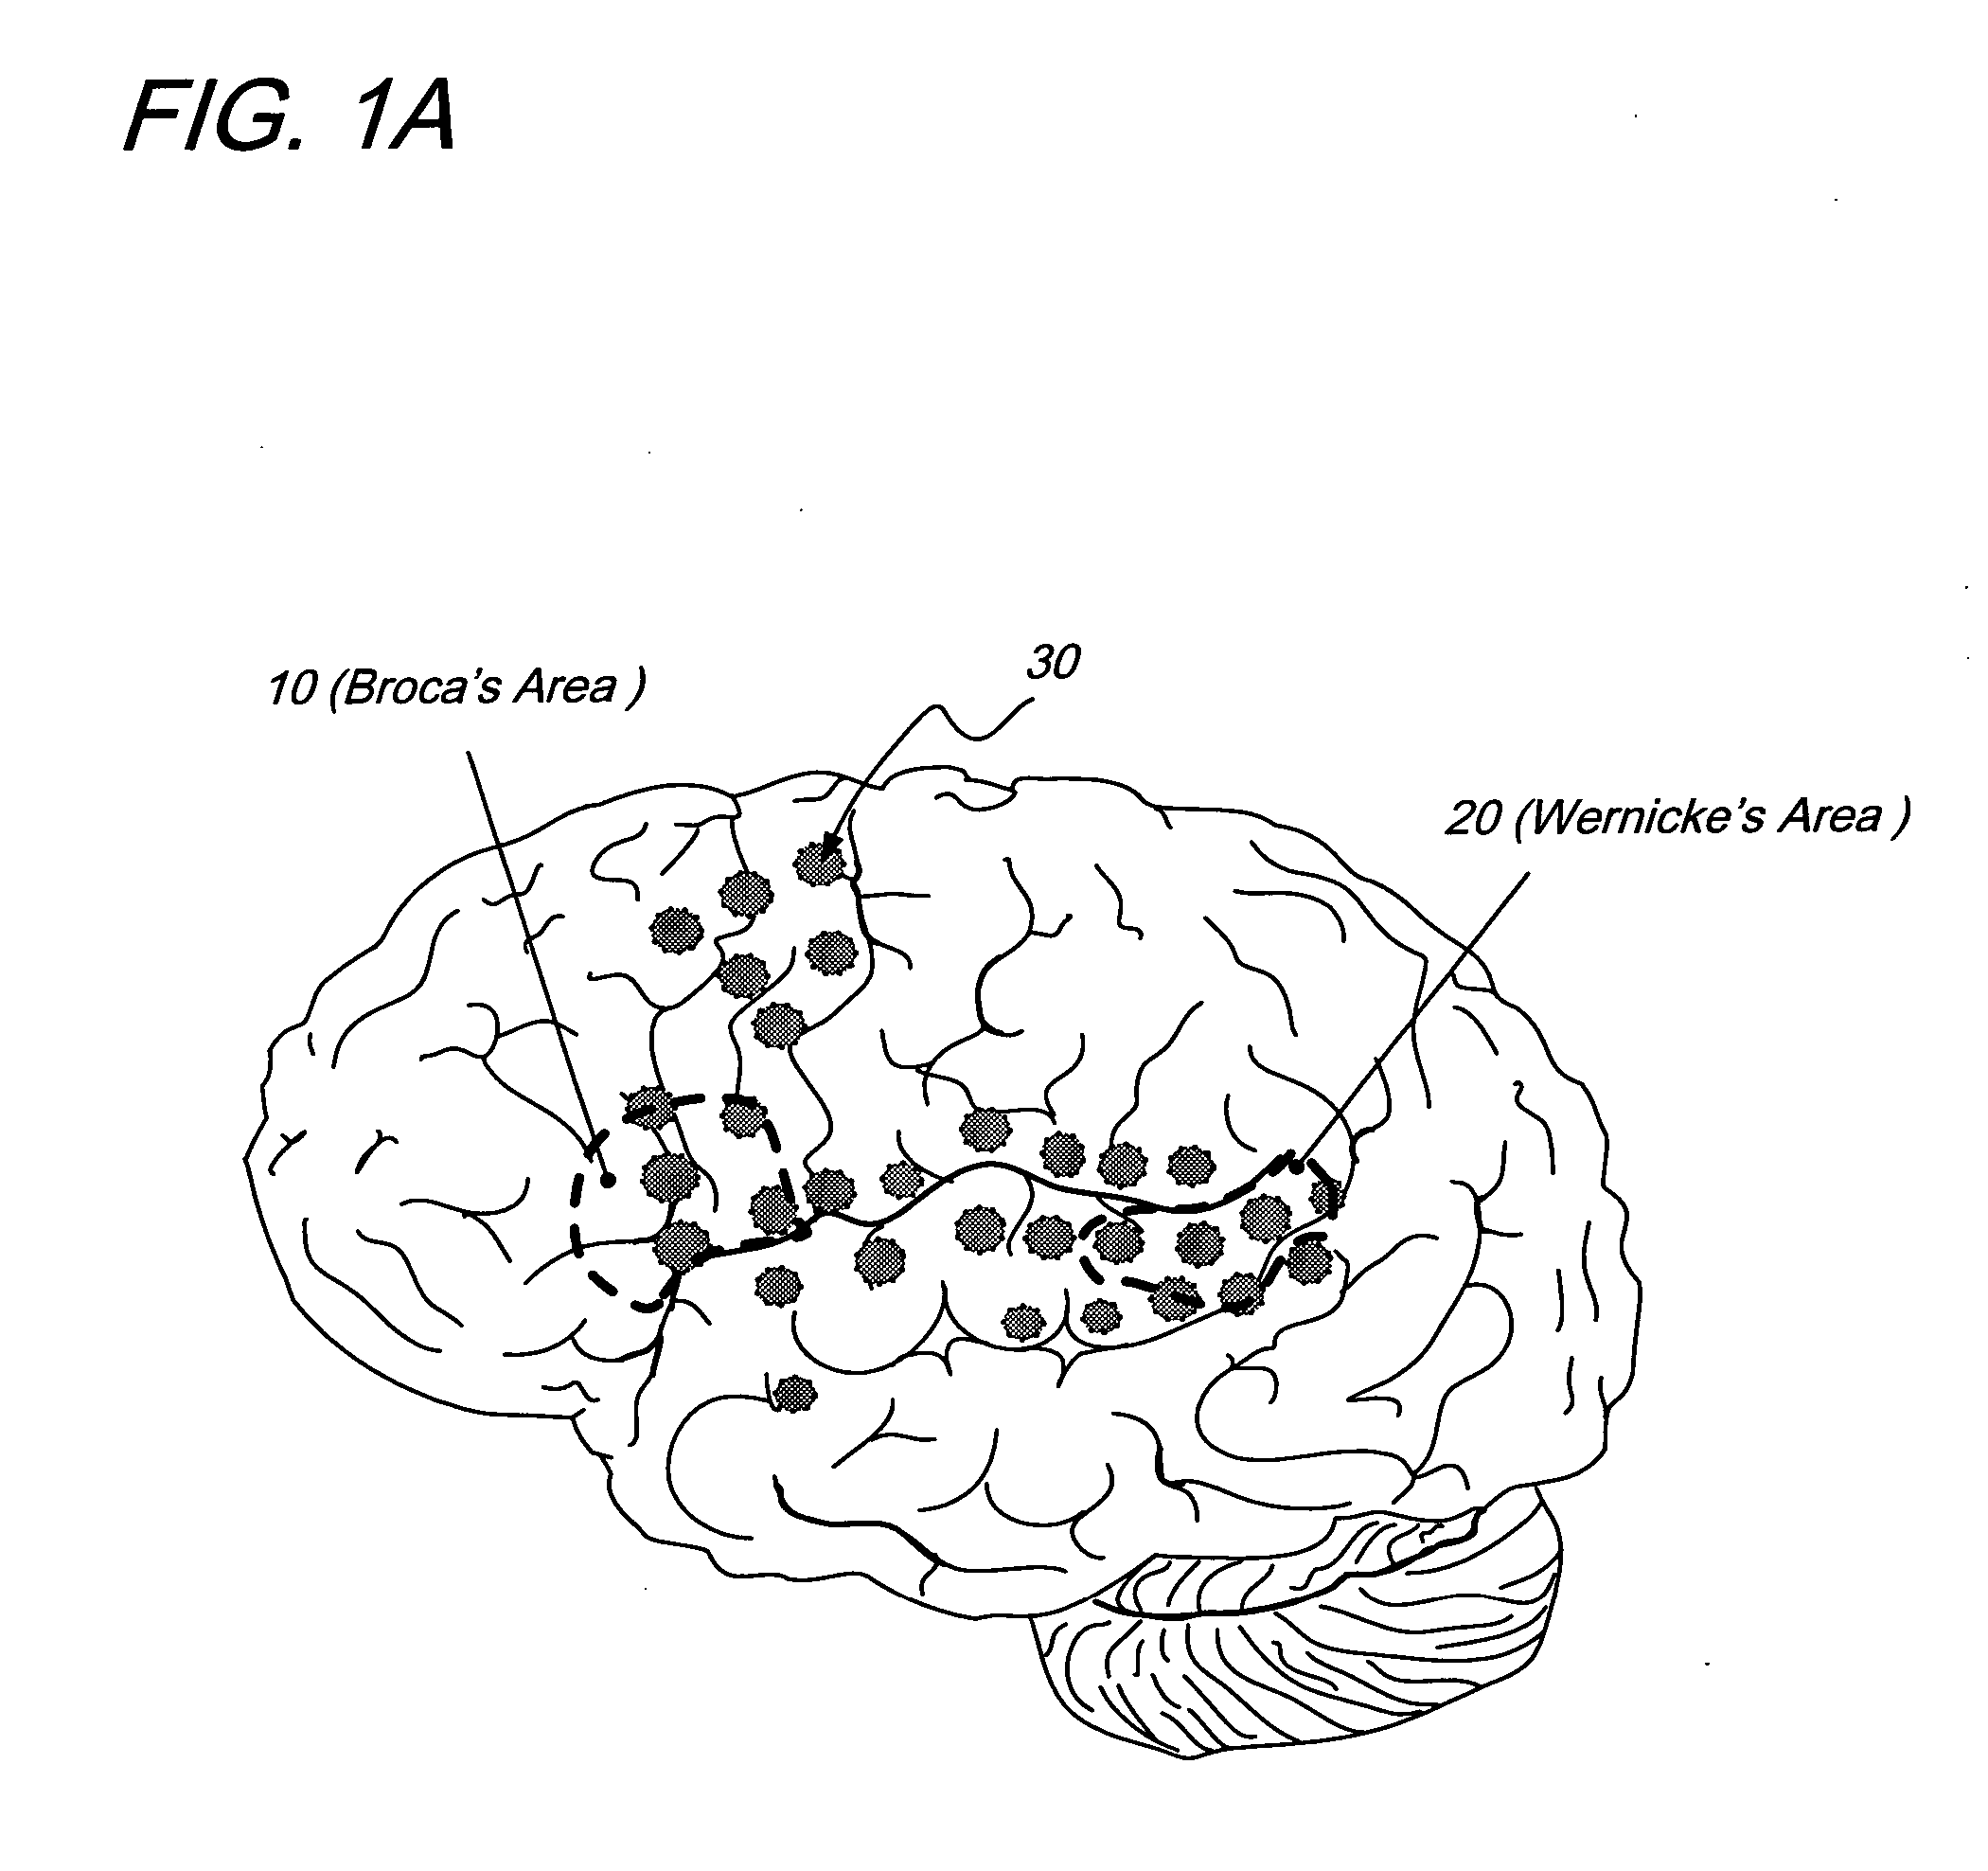 Treatment of aphasia by electrical stimulation and/or drug infusion